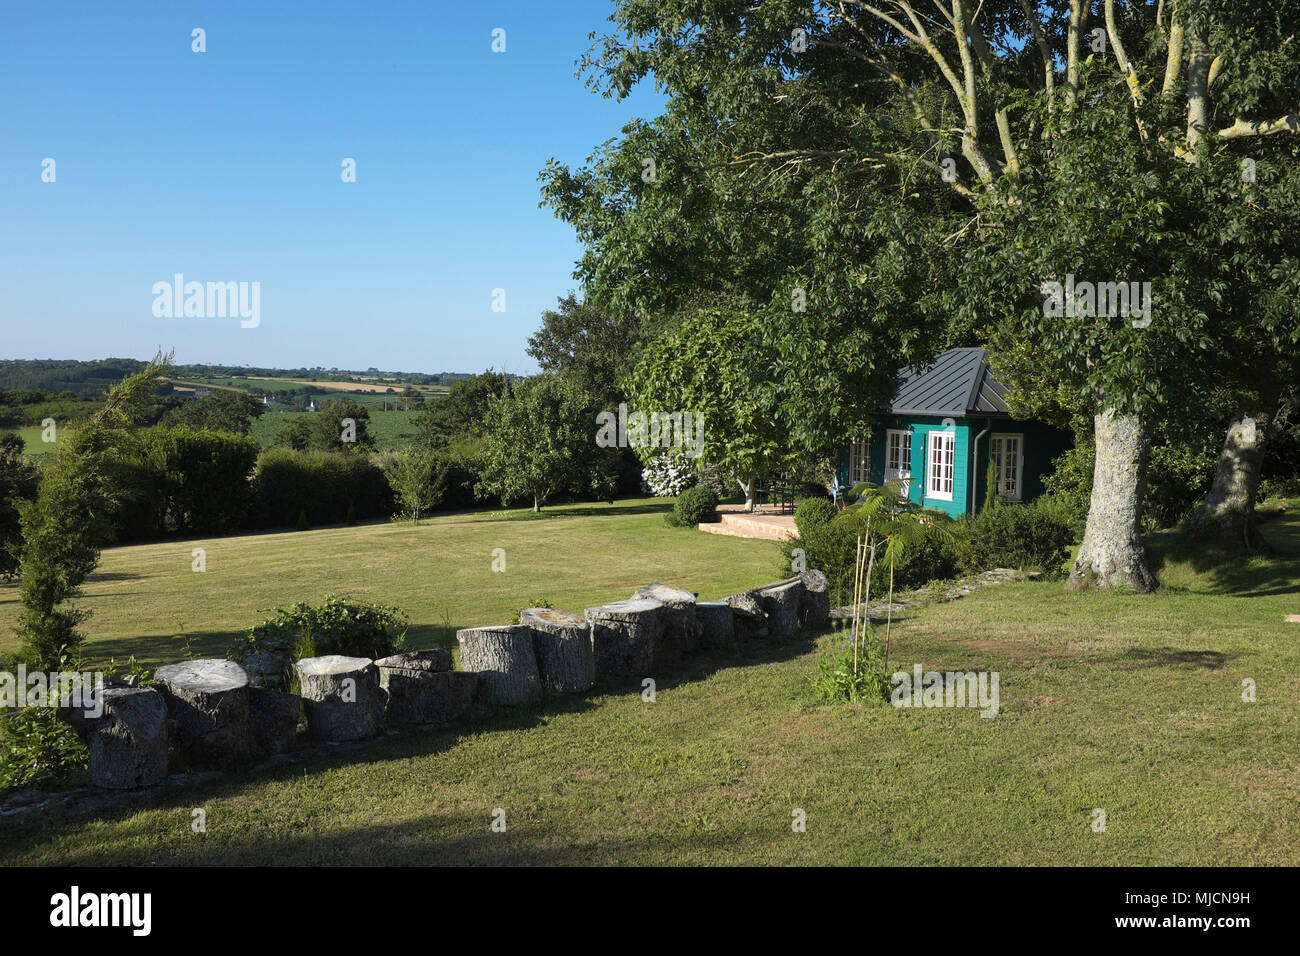 Brittany, summer house, tree, landscape, summer Stock Photo